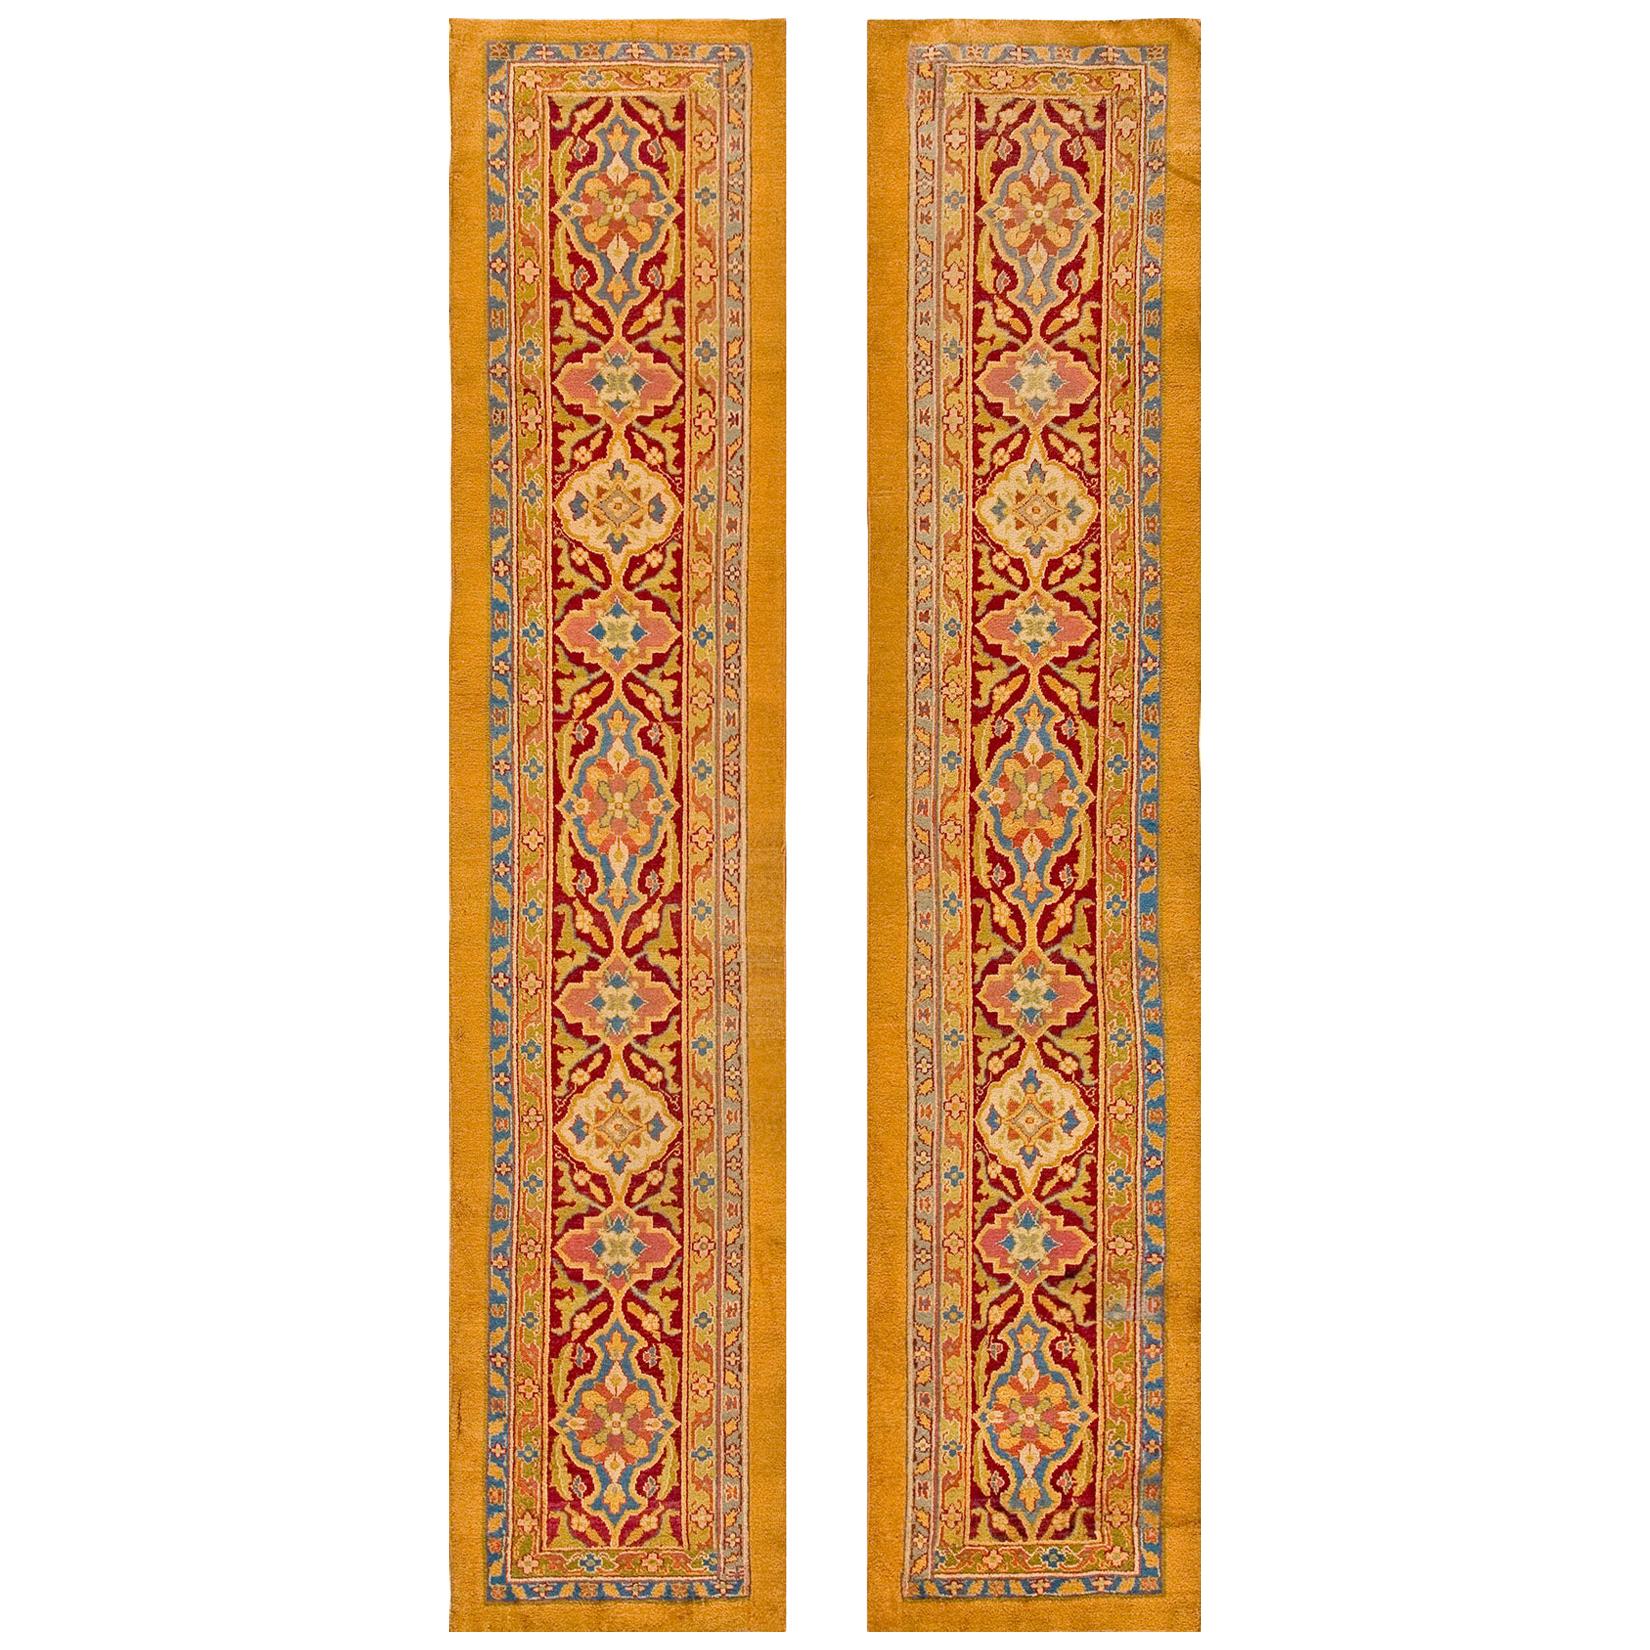 Early 20th Century Pair of N. Indian Agra Carpets ( 2'6" x 12' - 76 x 366 ) 